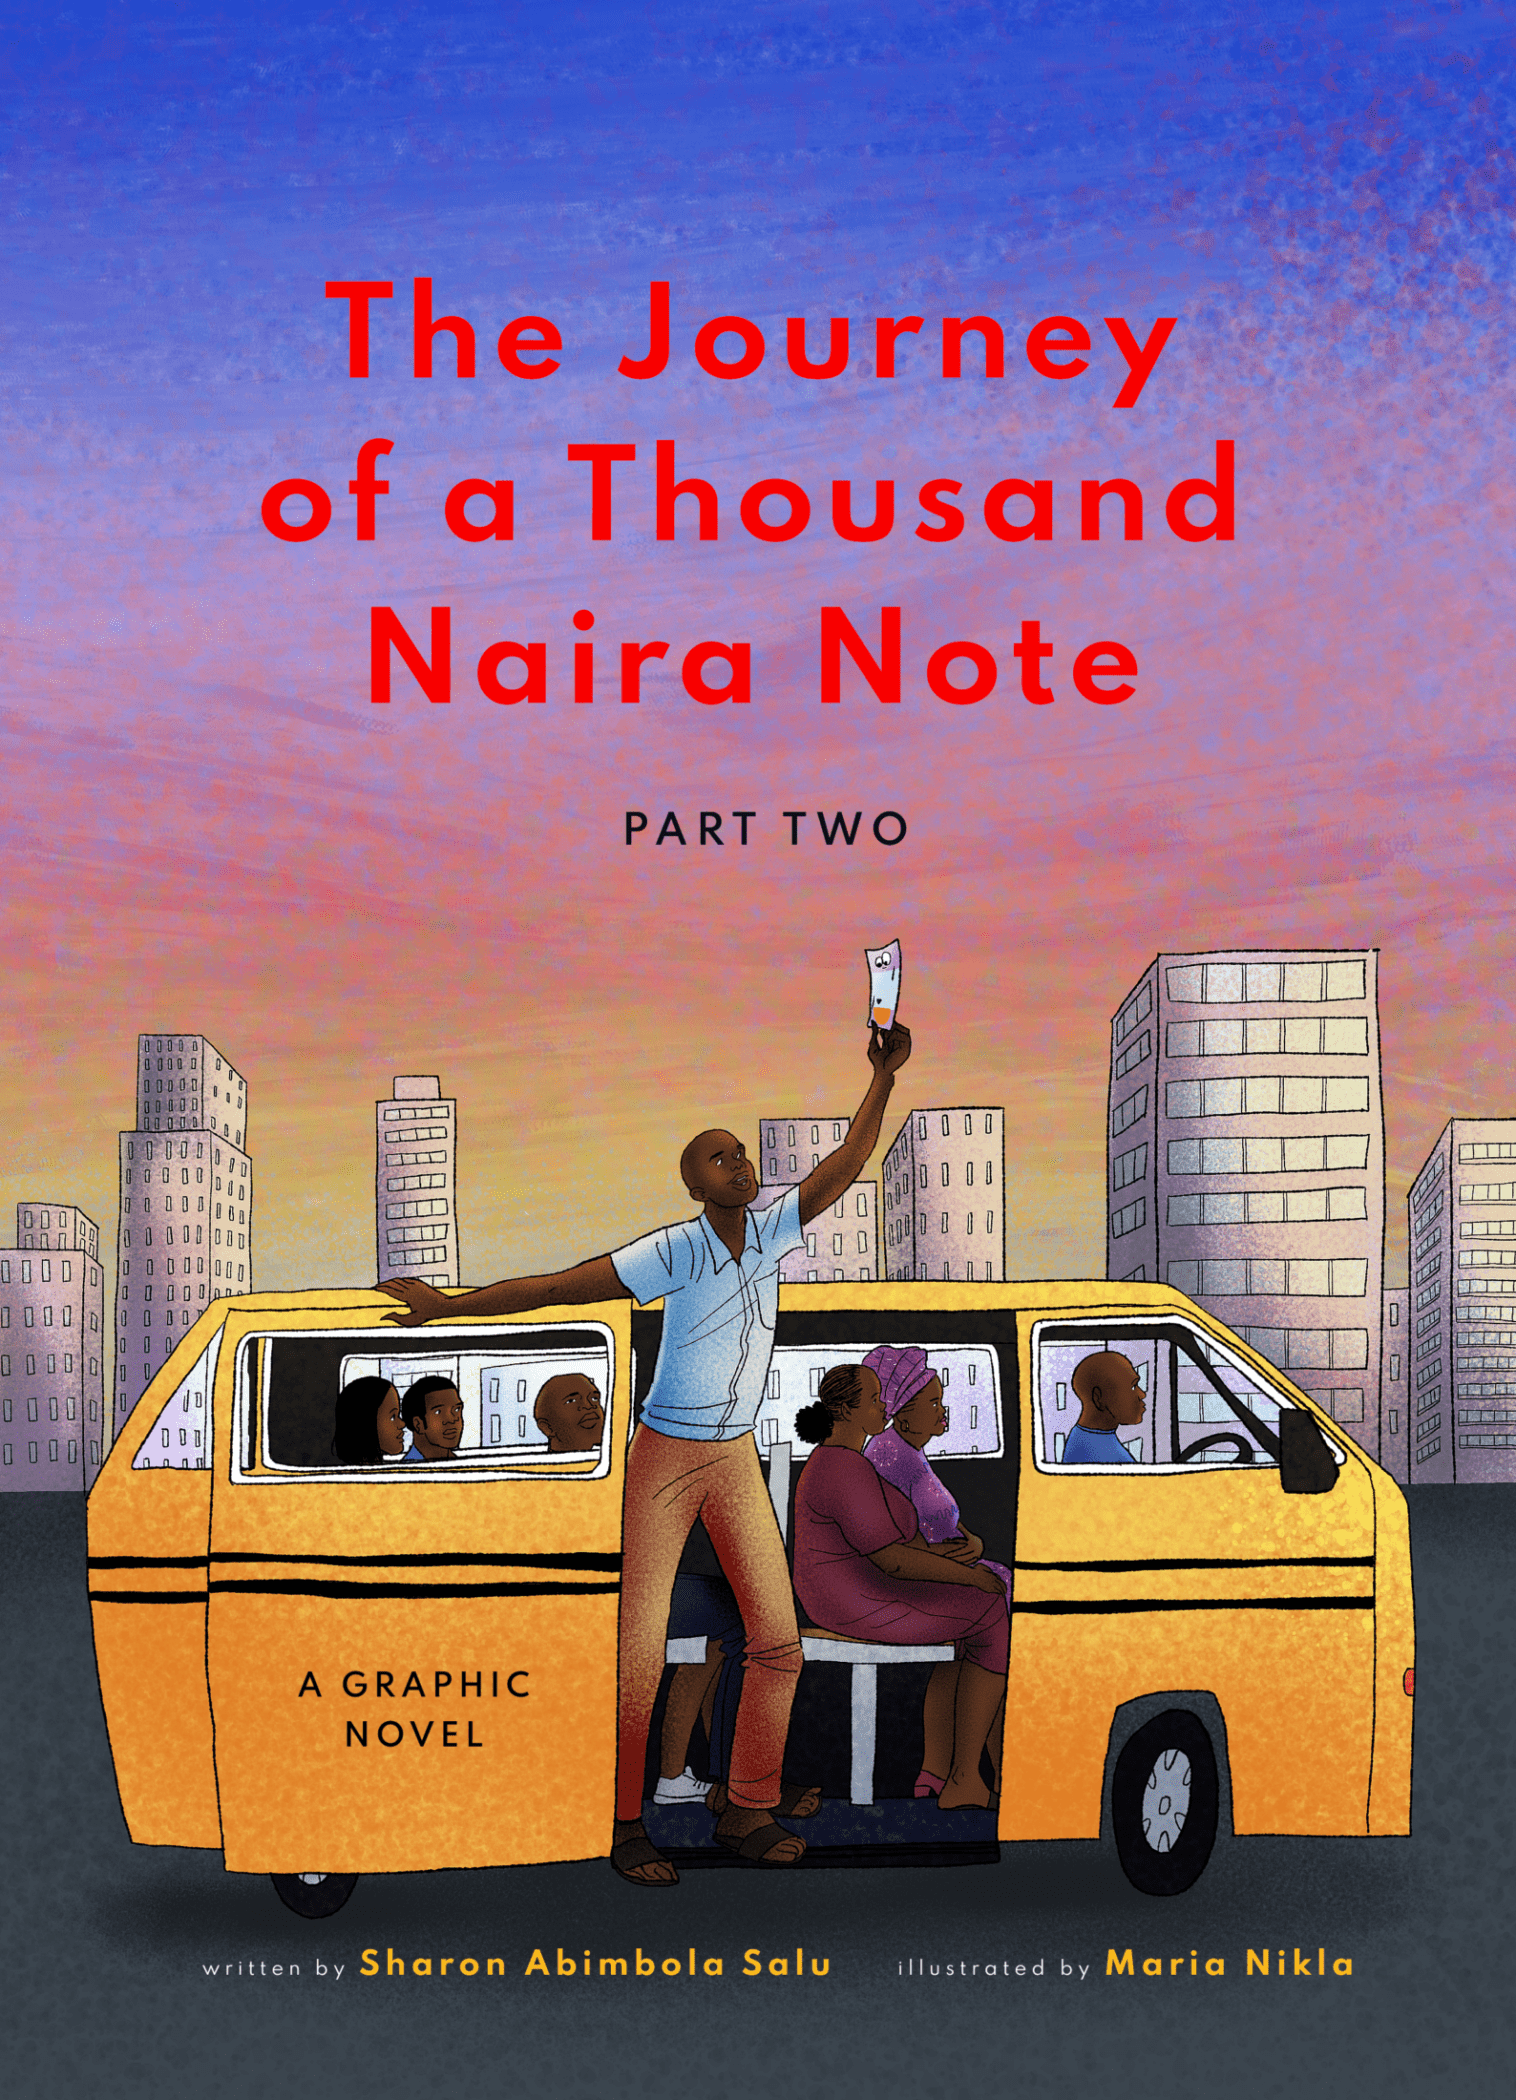 eBook Cover - The Journey of a Thousand Naira Note Part Two - Nigerian Graphic Novel